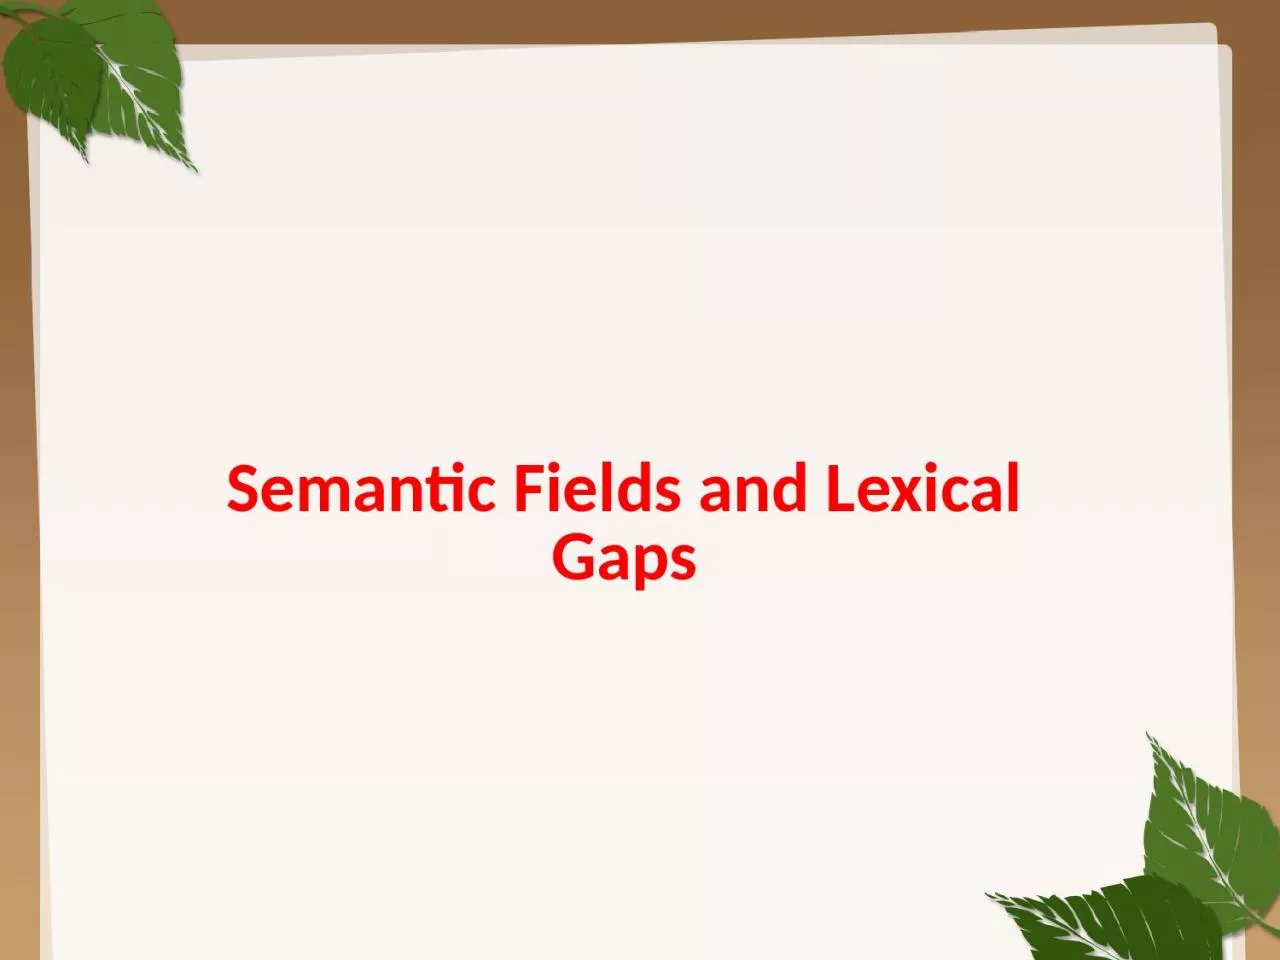 Semantic Fields and Lexical Gaps